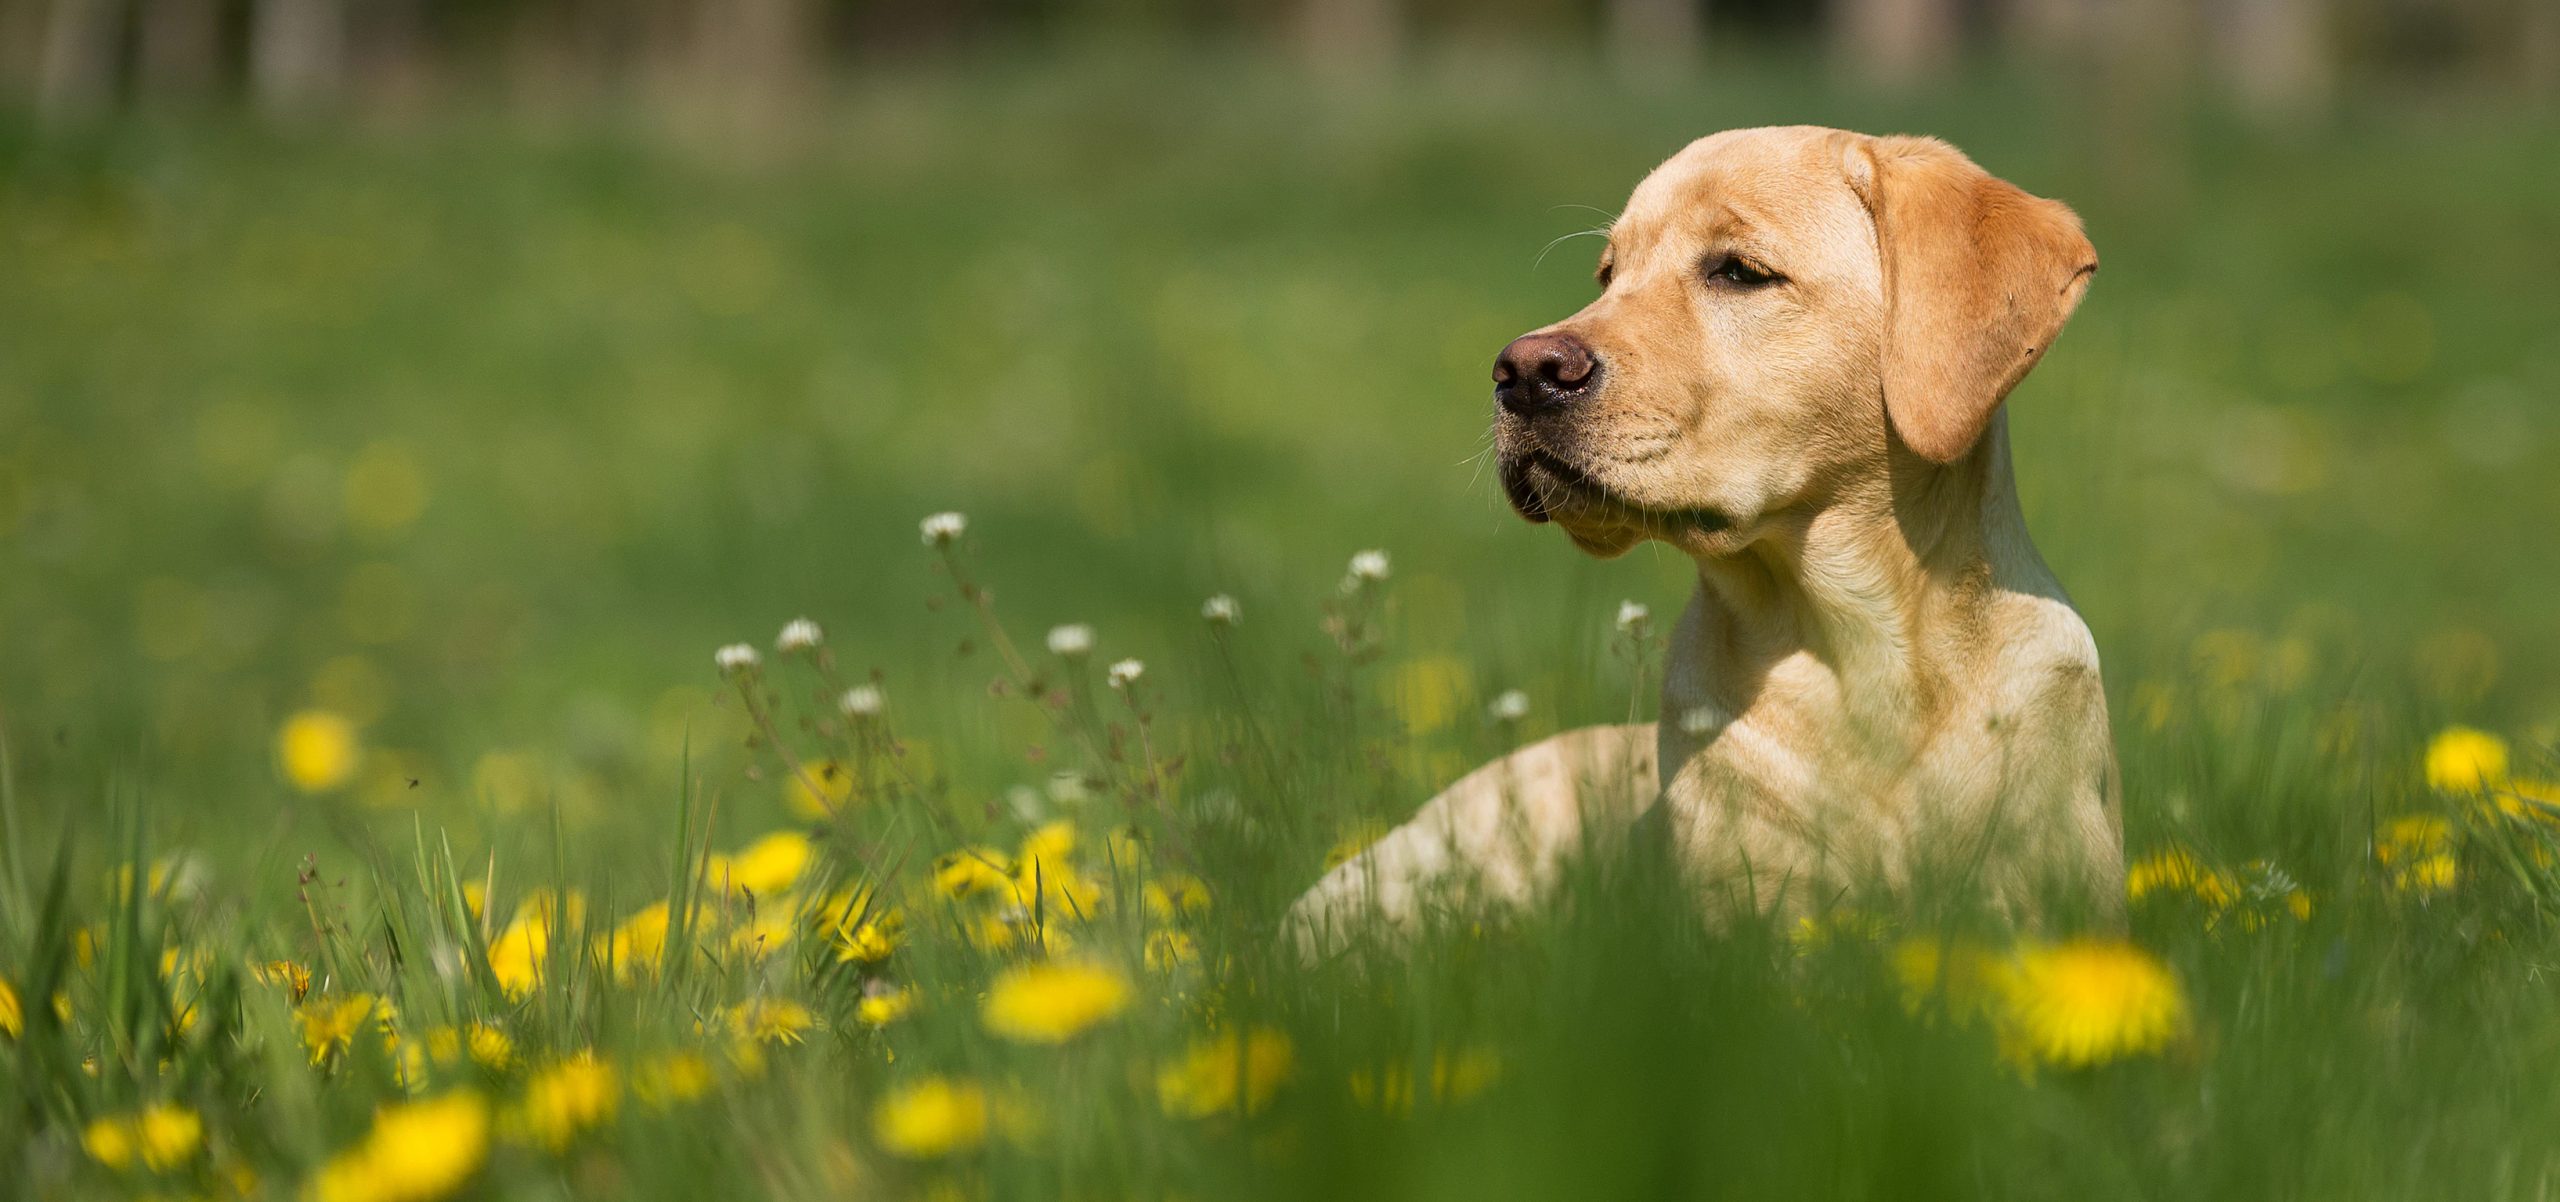 Dog in field with grass and flowers